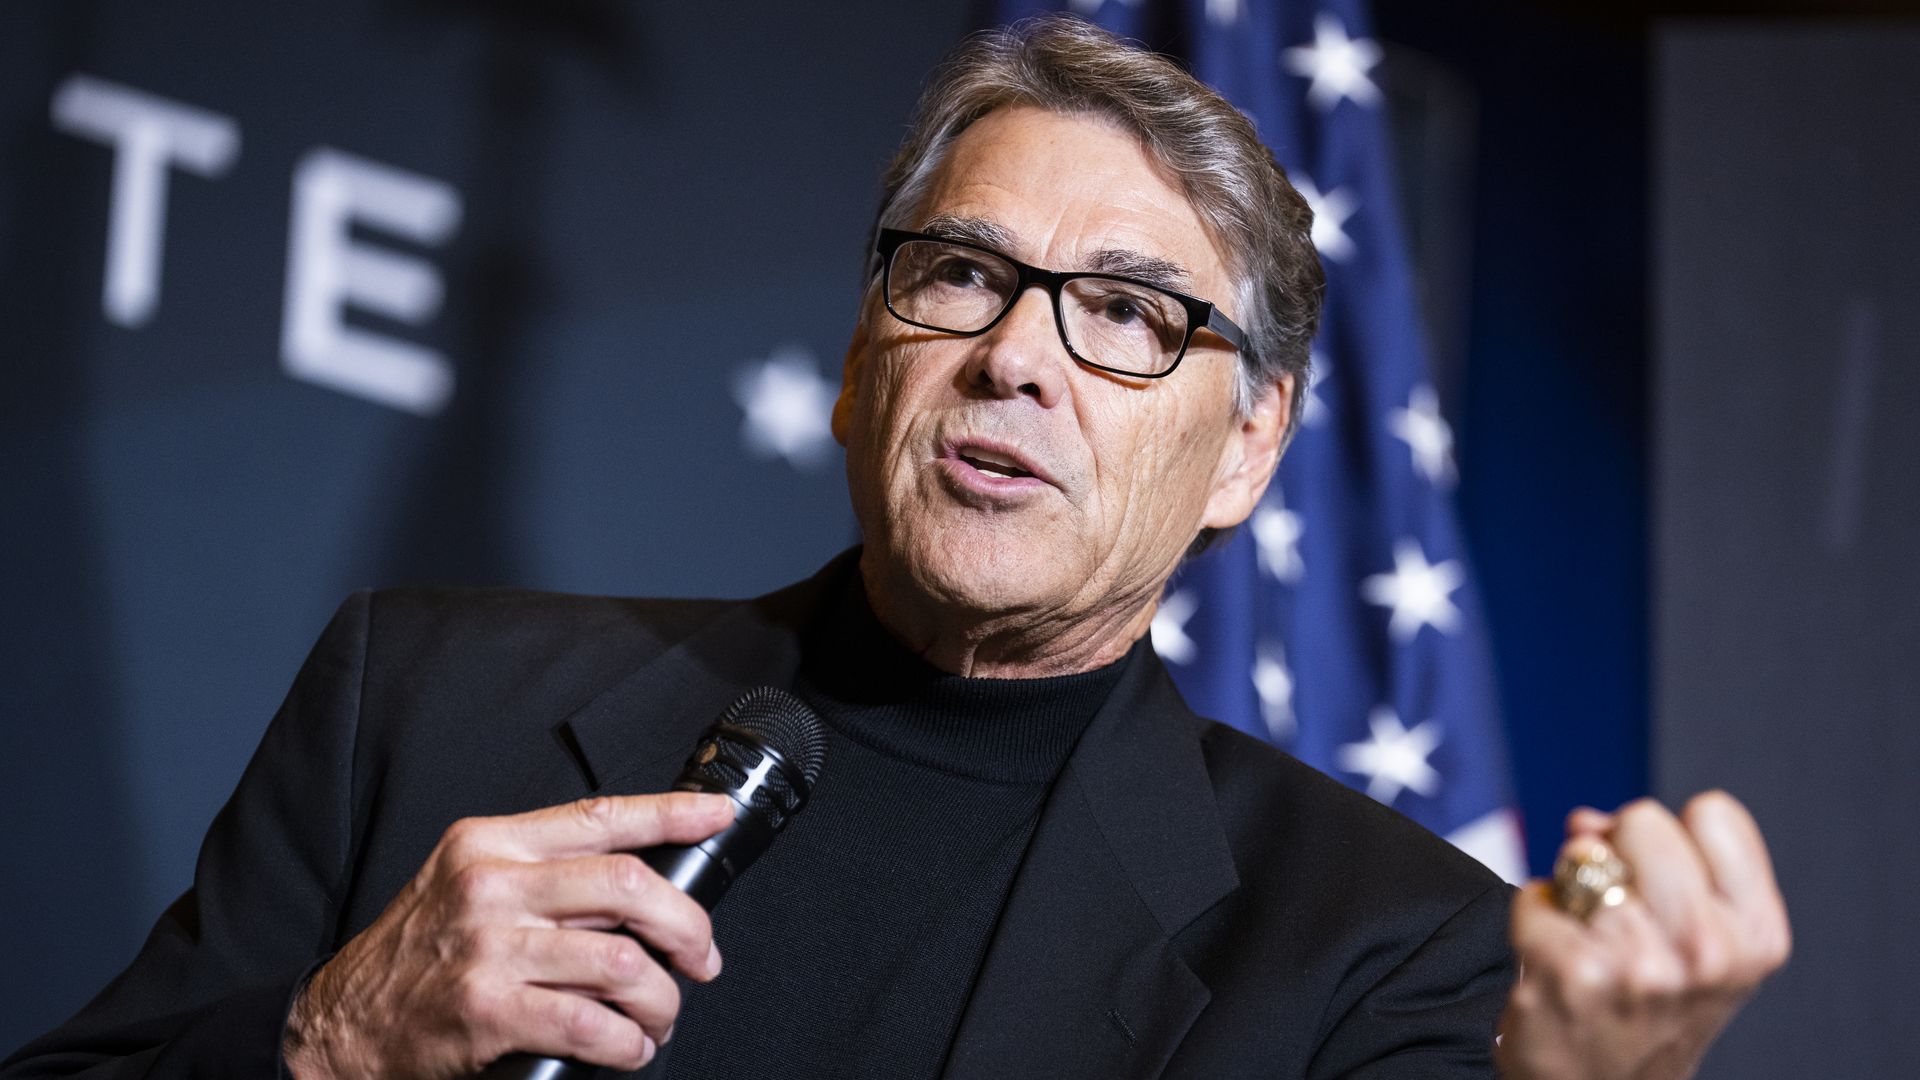 Rick Perry, in glasses, clenching a fist as he speaks into a microphone